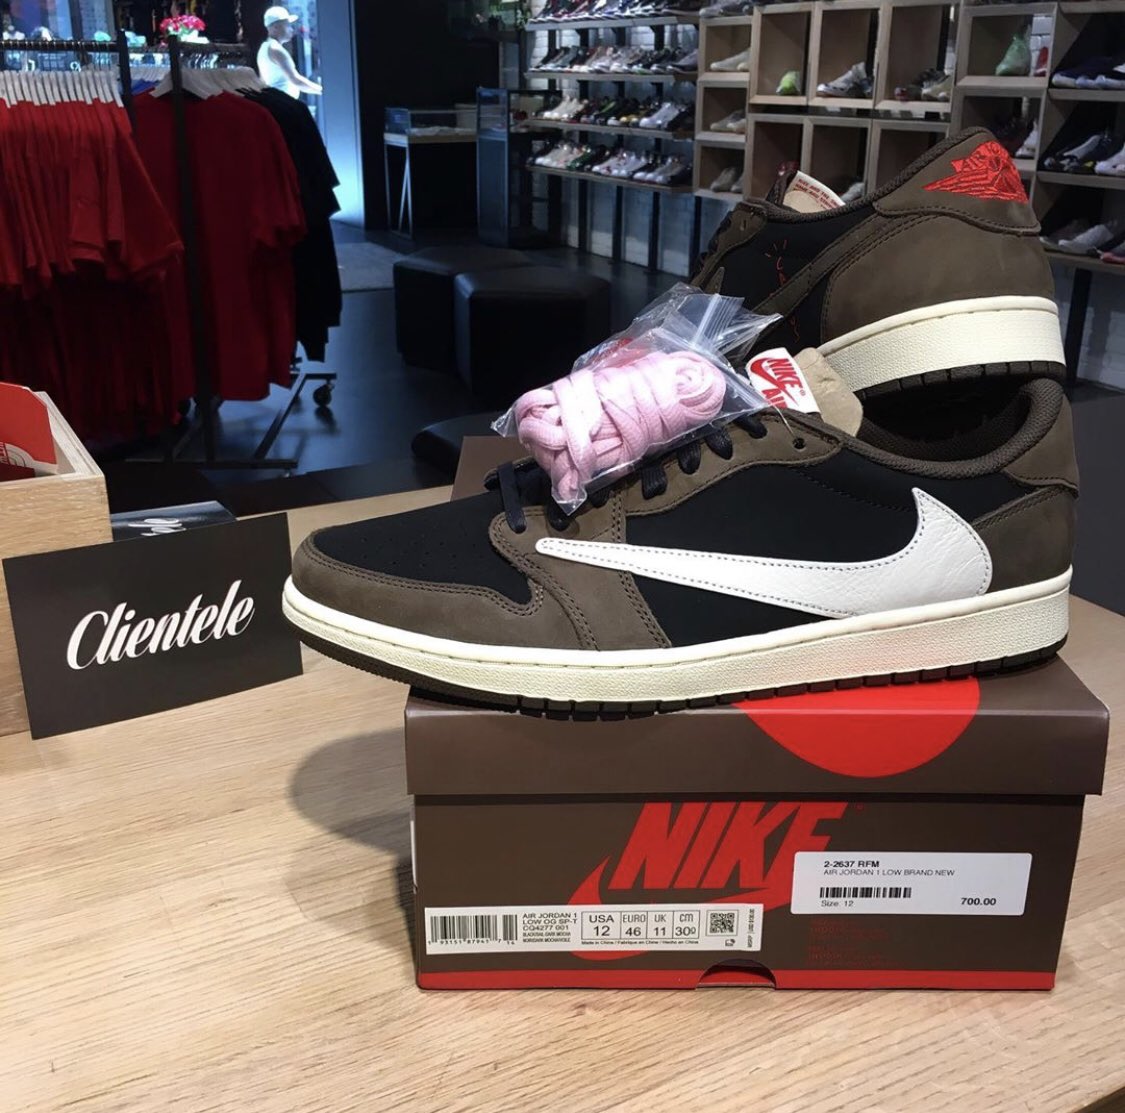 CLIENTELE on Twitter: "AVAILABLE AT ROOSEVELT FIELD MALL AND ONLINE SIZE 12  BRAND NEW $700 https://t.co/cmHmfN68E5" / Twitter